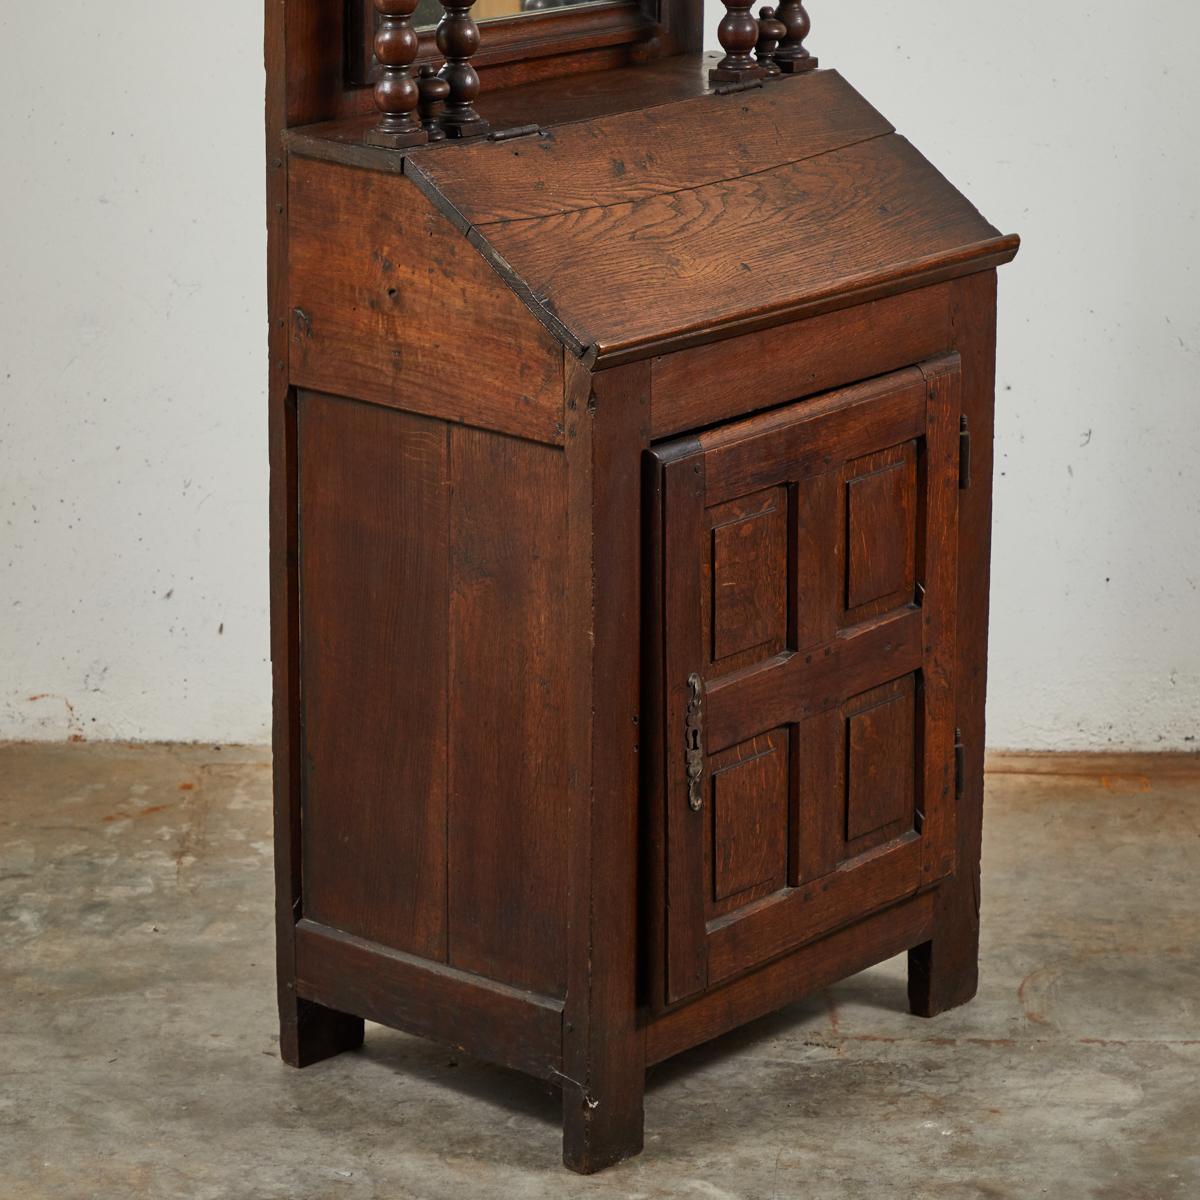 Early 18th Century French Petite Secretaire or Bureau with Projecting Cabinet For Sale 2